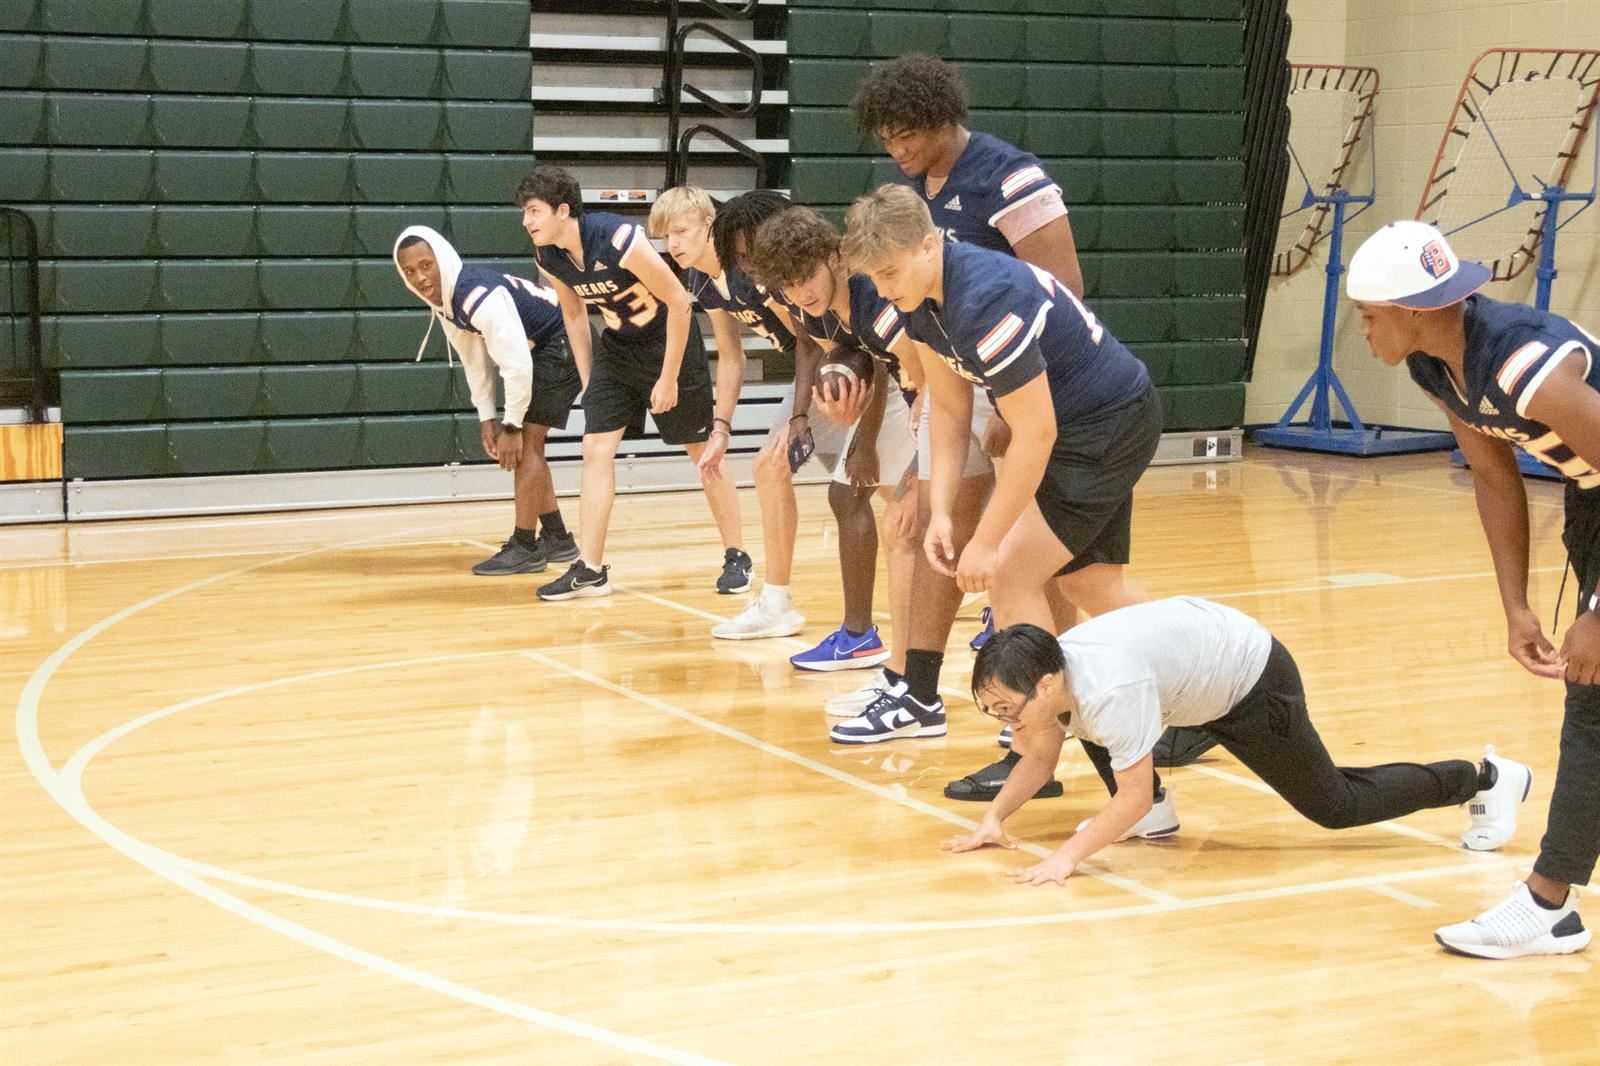 Bridgeland High School football players set up during a running station at Camp Courage on May 16 at Cypress Falls.